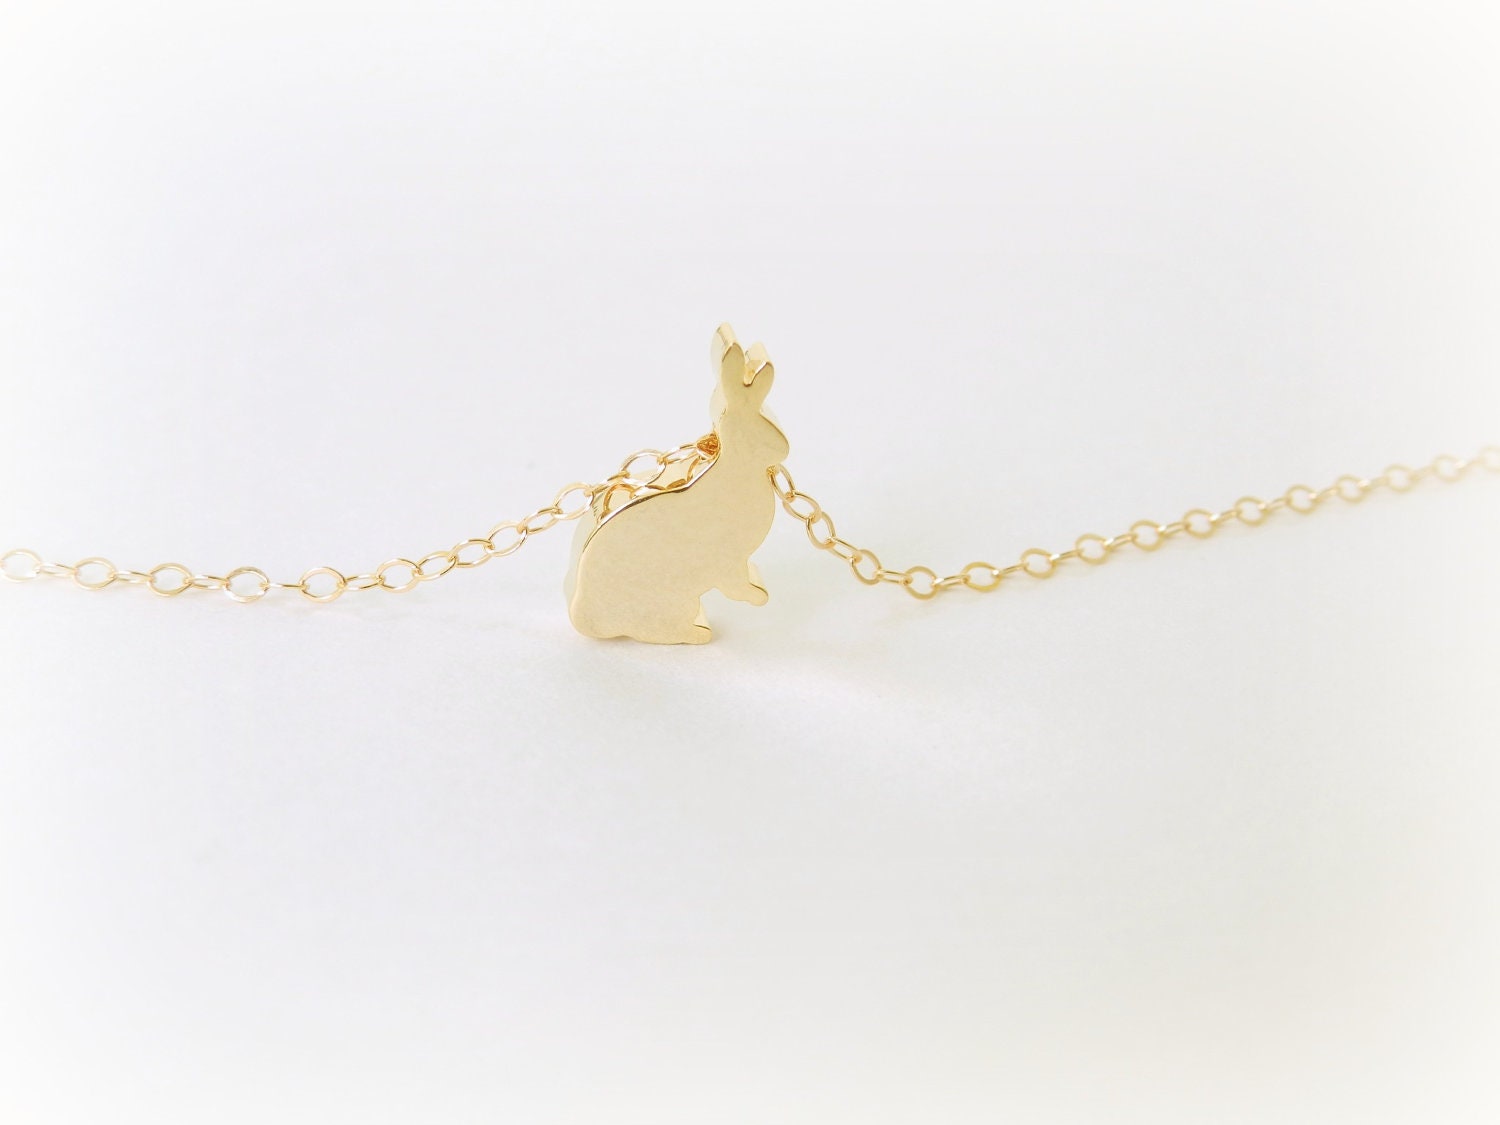 Lucky Bunny necklace with 14k gold filled chain.